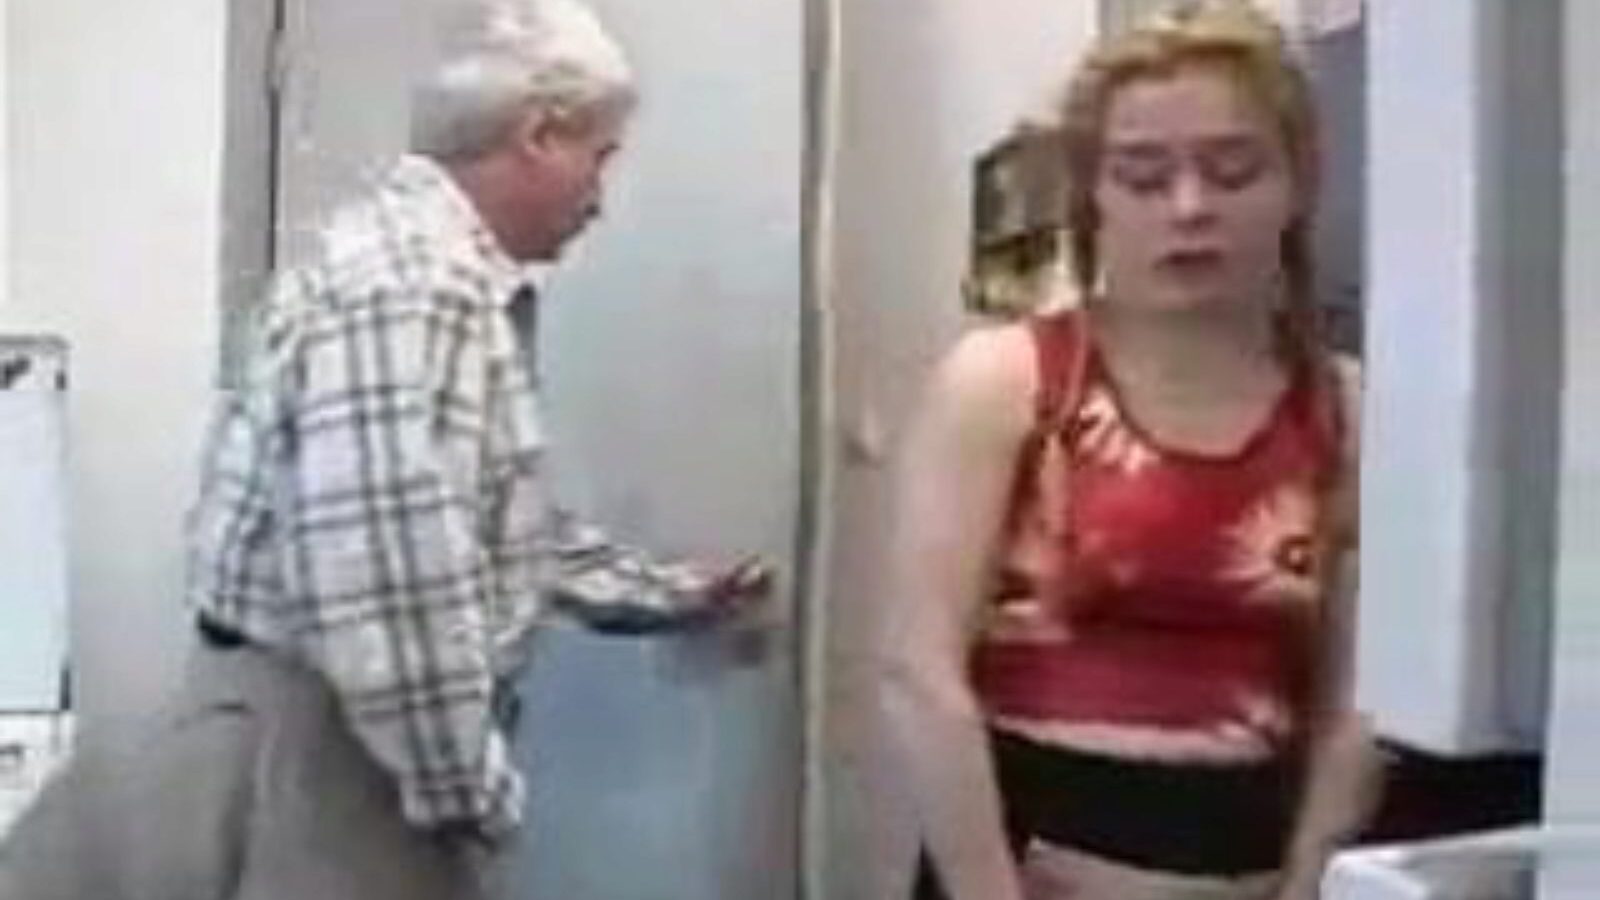 Kotb Grandpapa Calls Her Round for a Fuck, Porn 59: xHamster See Kotb Grandpapa Calls Her Round for a Fuck clip on xHamster, the greatest orgy tube web page with tons of free Spankwire Tube Ixxx Free & Ovguide pornography clips